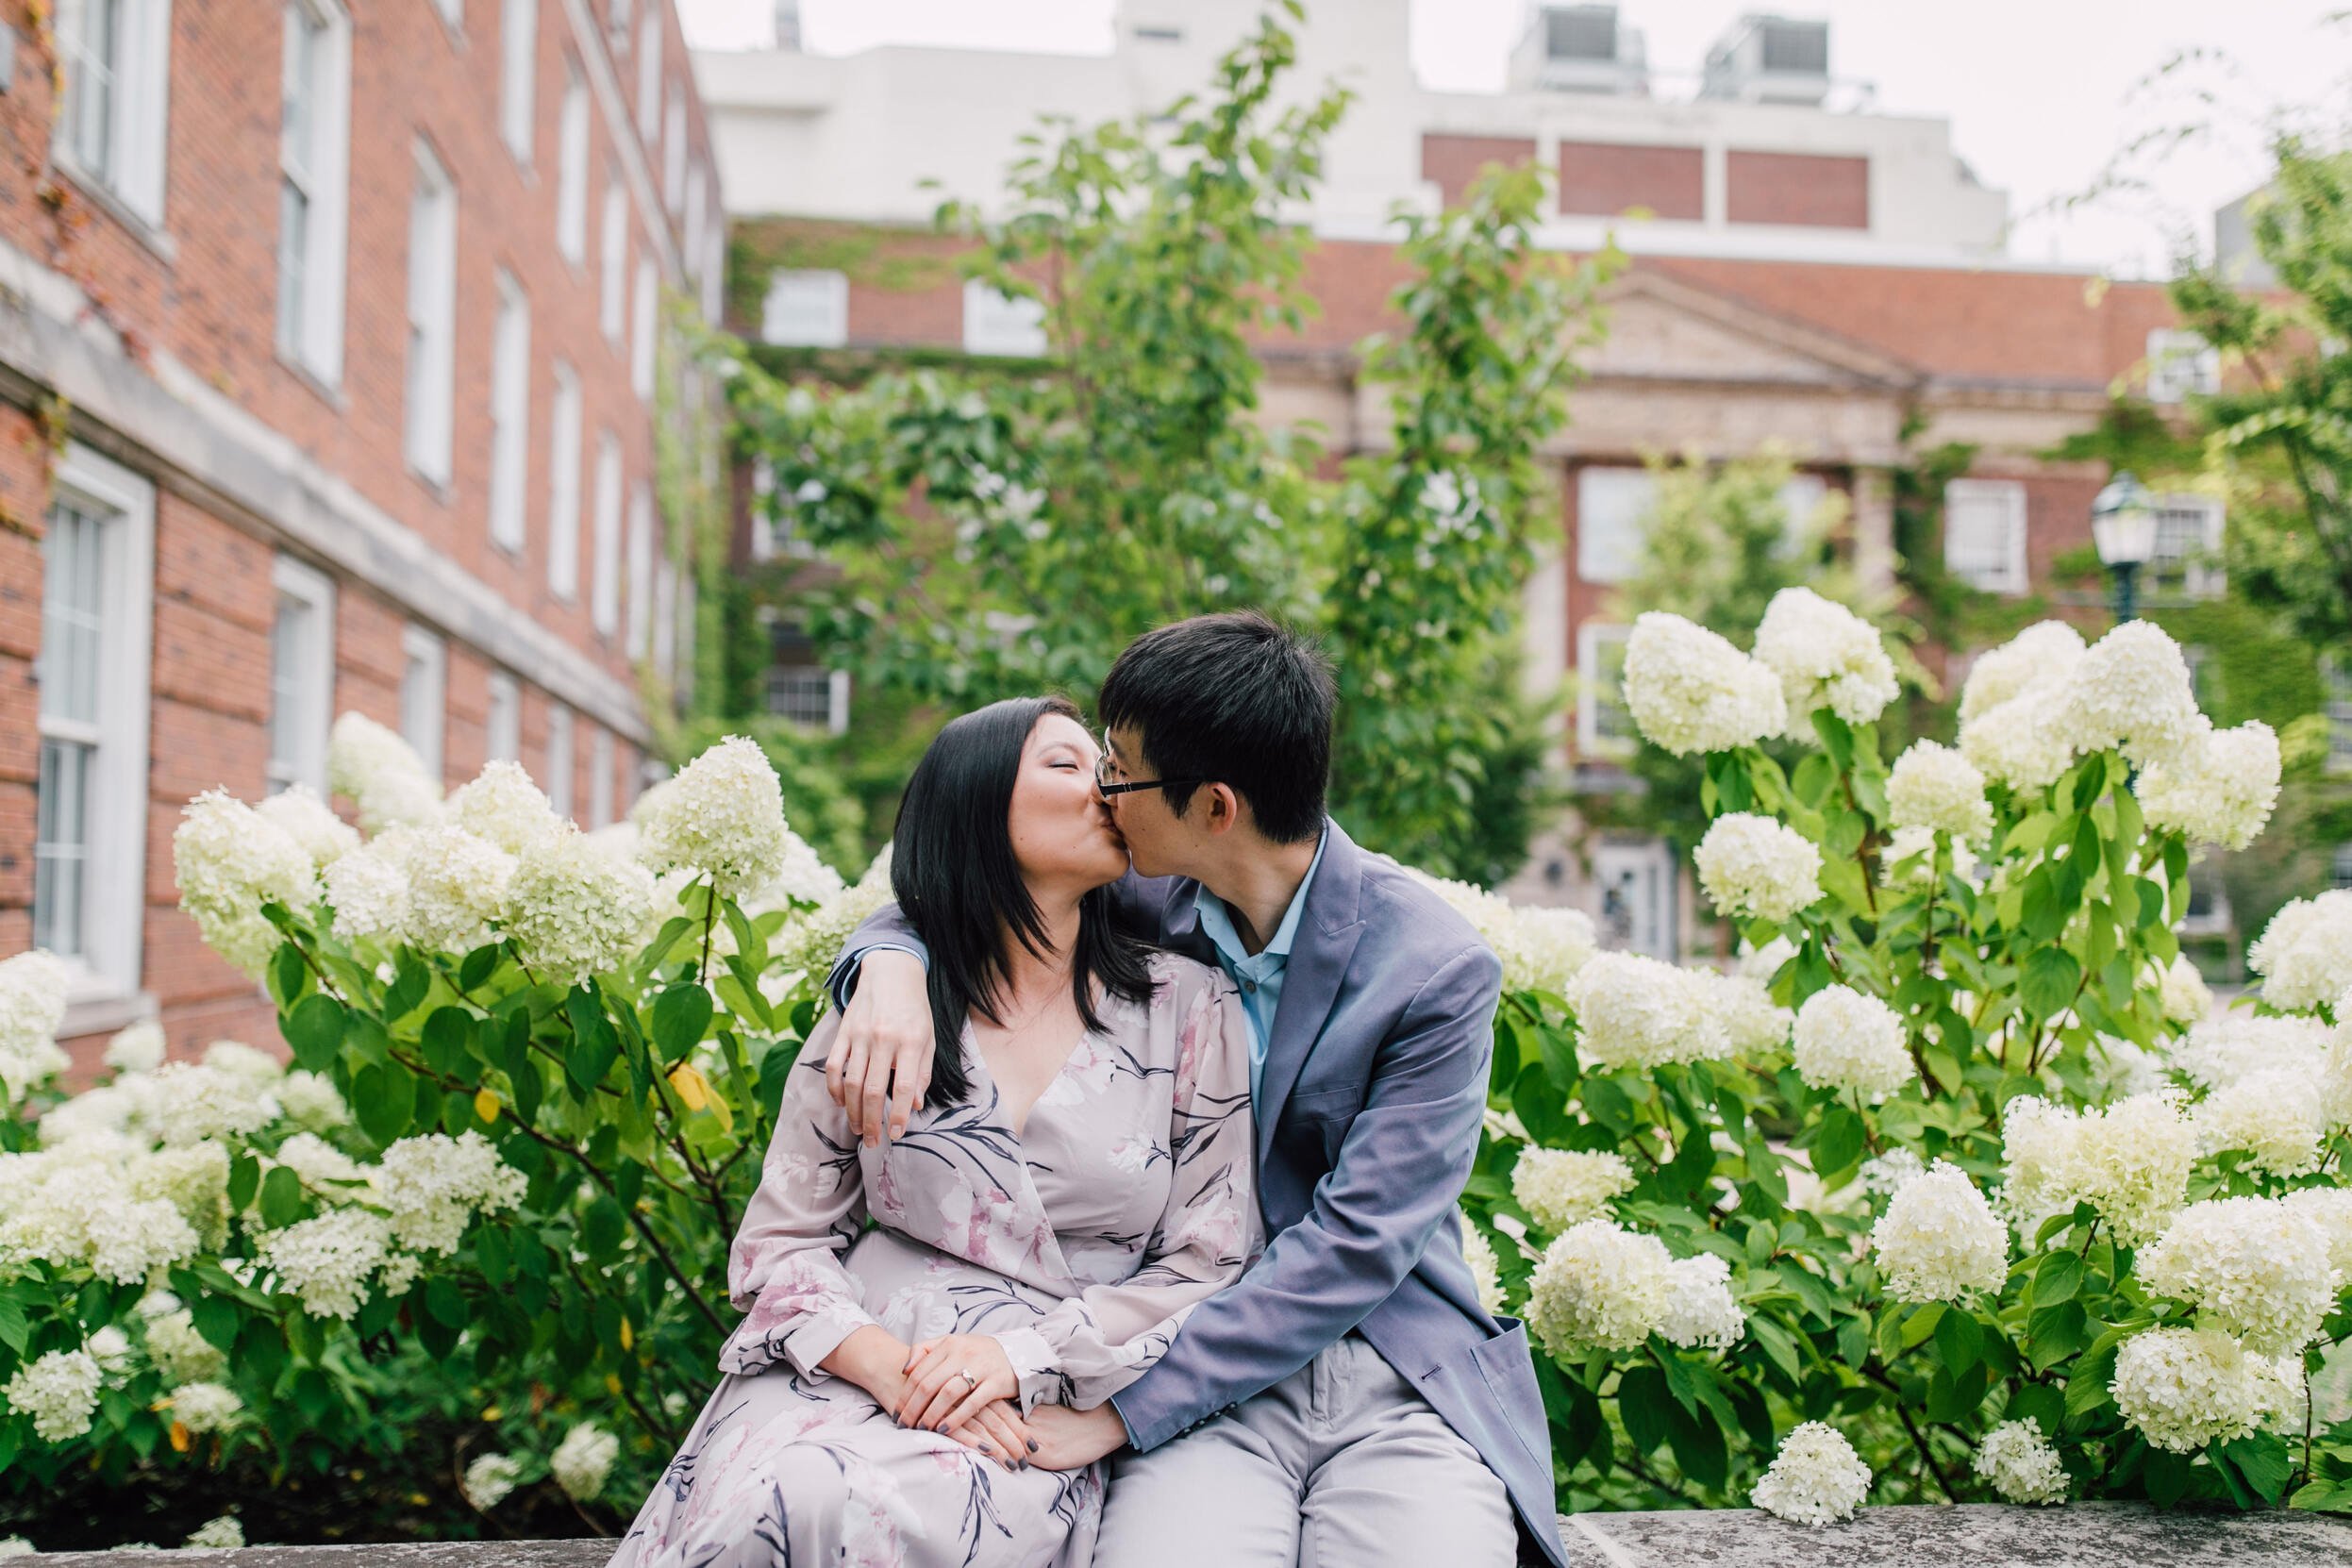  Engaged couple kiss in front of hydrangea bushes, engagement photography 